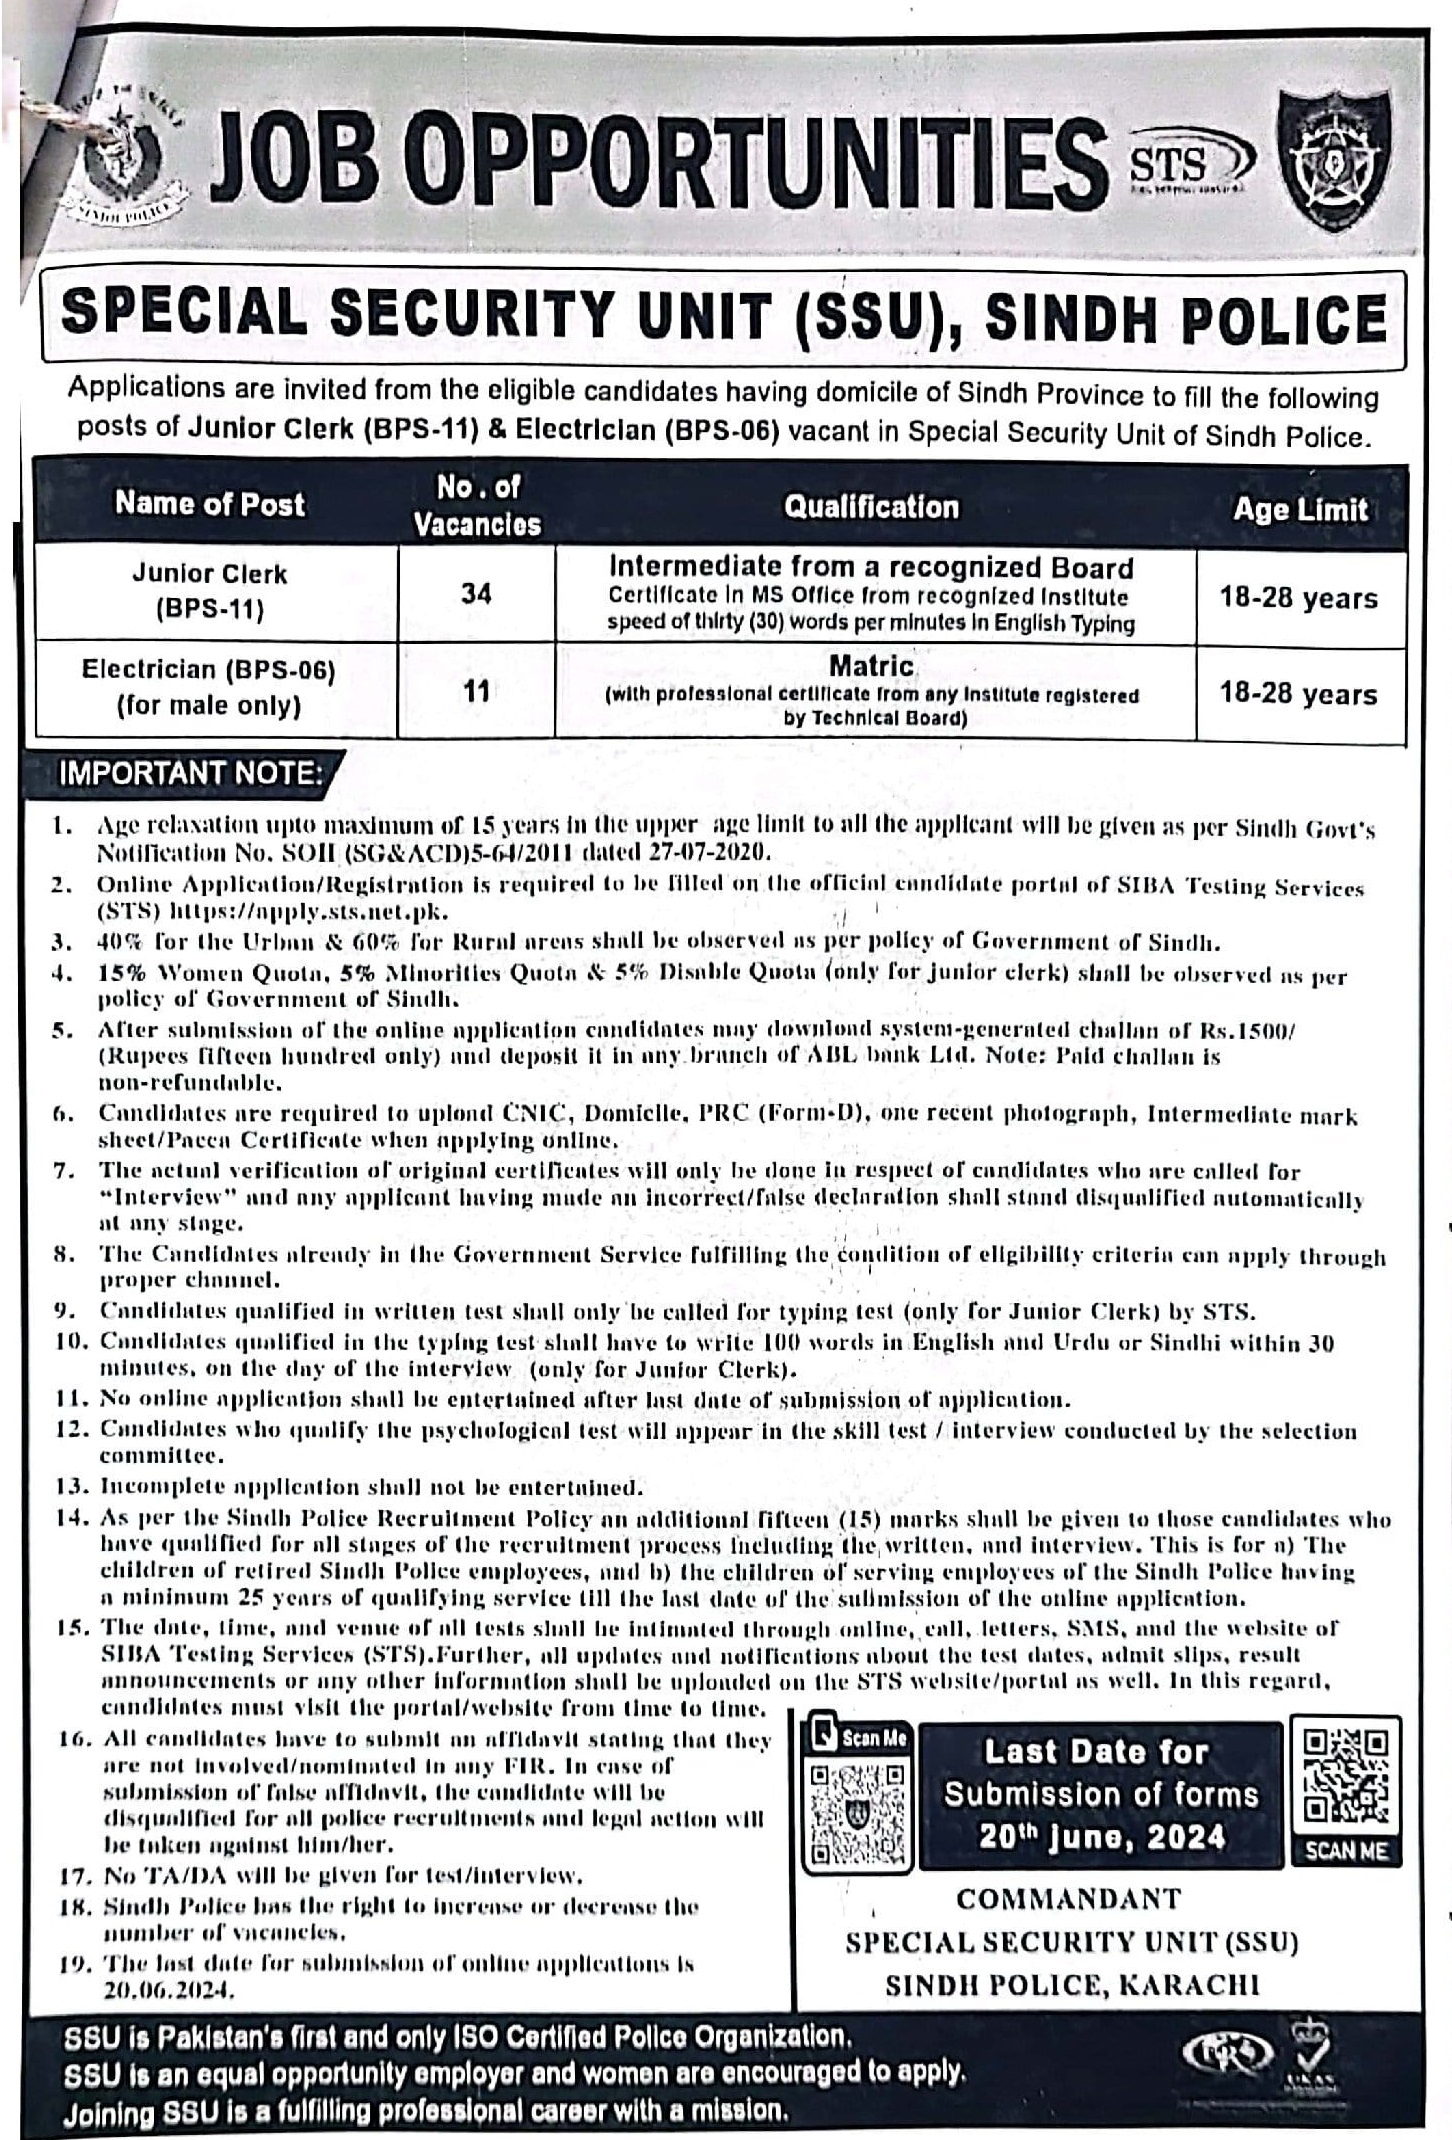 Special Security Unit Police Jobs 2024 for Clerks